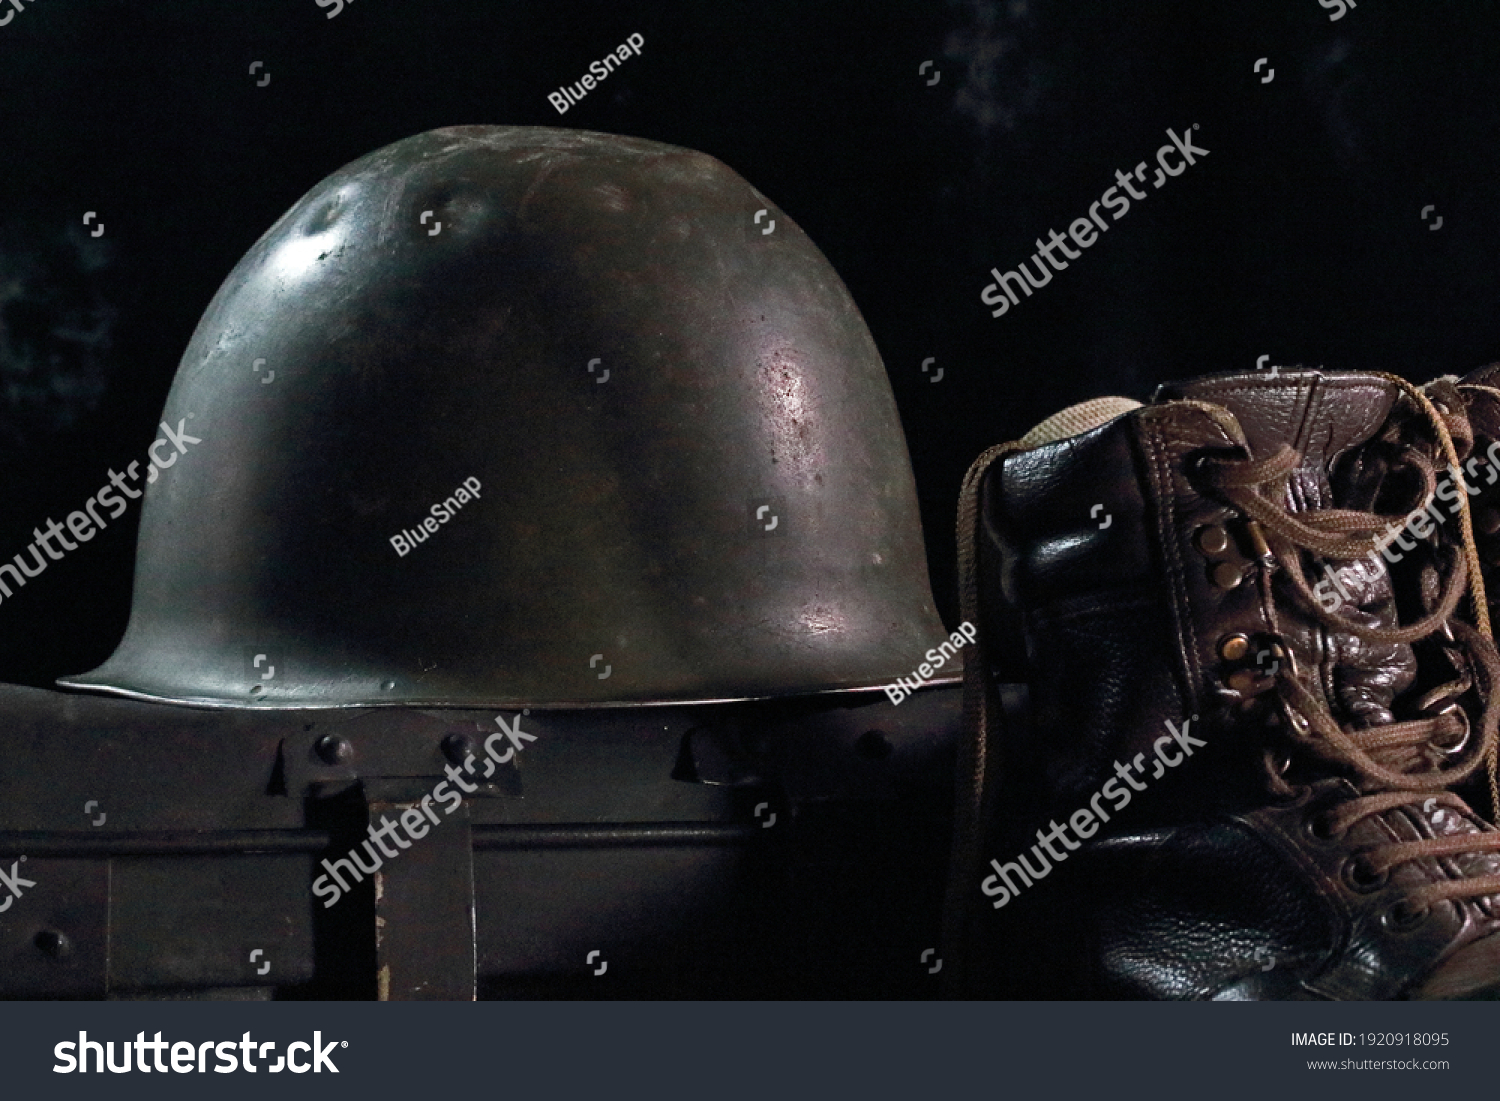 METAL ARMY HELMET WITH AN ARMY COMBAT BOOT AND A METAL TRUNK #1920918095